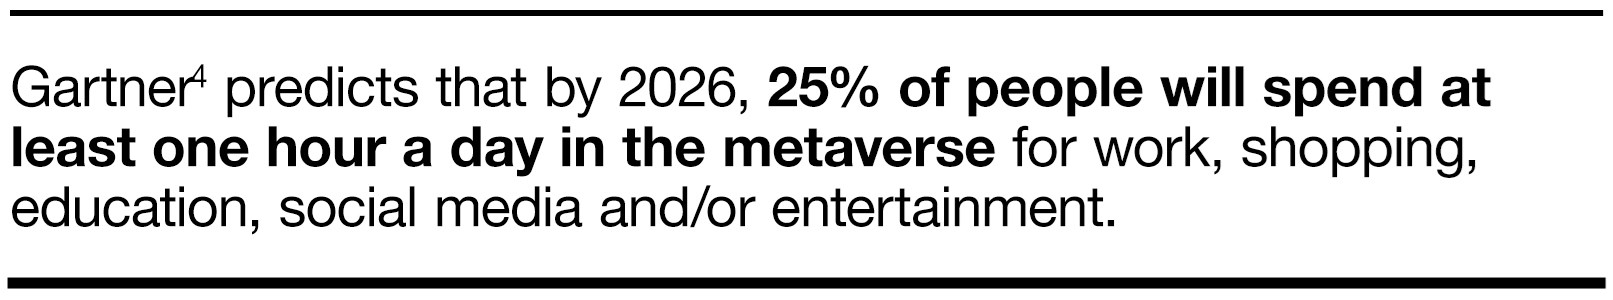 Gartner4 predicts that by 2026, 25% of people will spend at least one hour a day in the metaverse for work, shopping, education, social media and/or entertainment.